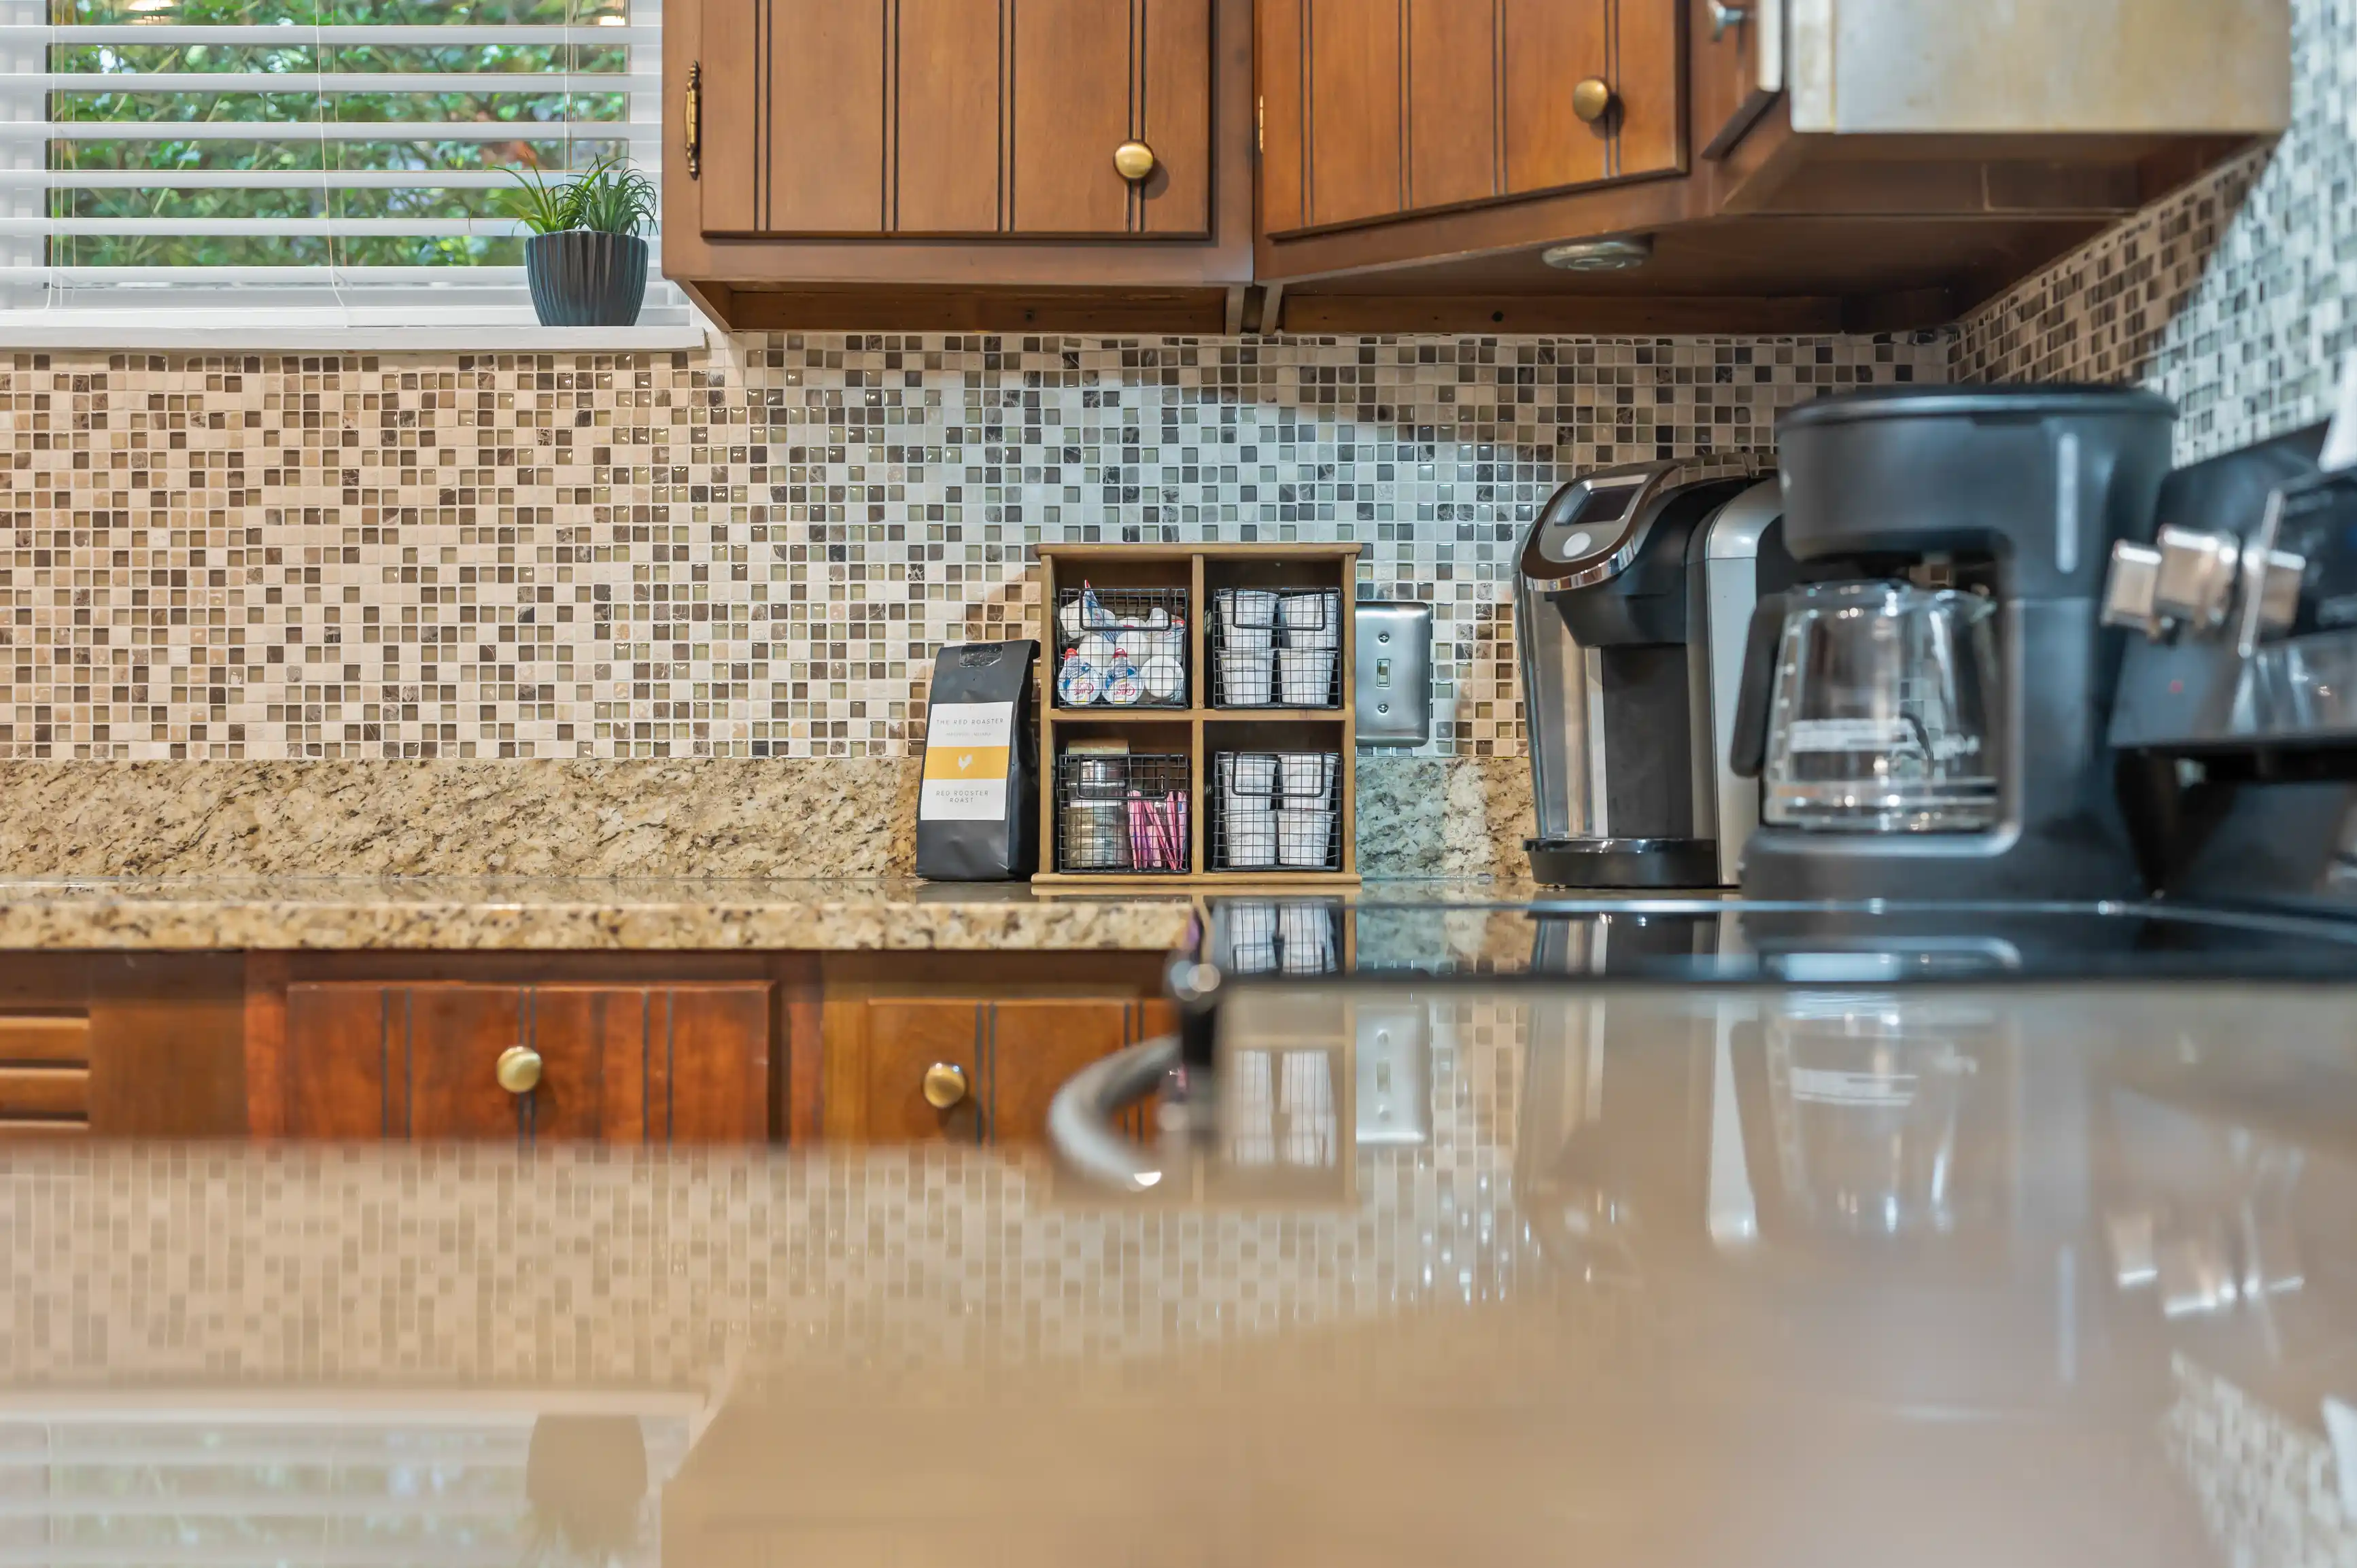 Modern kitchen countertop with reflective surface, showing a coffee maker, a wooden organizer with coffee pods, and a potted plant near the window with mosaic tile backsplash.